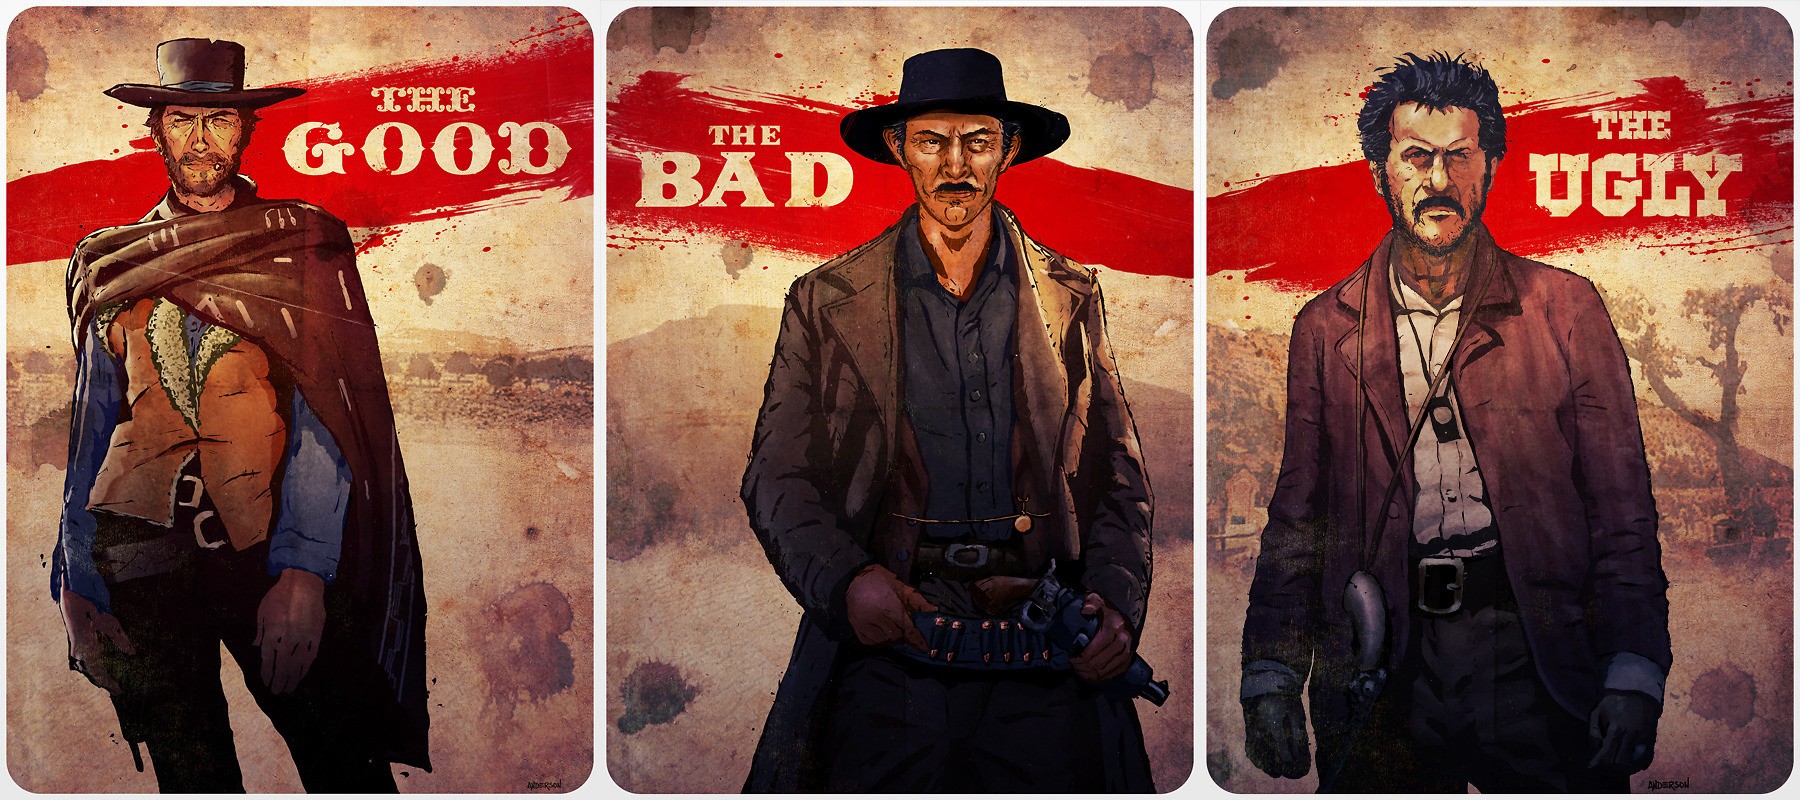 General 1800x800 Clint Eastwood The Good, the Bad and the Ugly collage western movies Lee Van Cleef Eli Wallach Sergio Leone artwork men ponchos hat